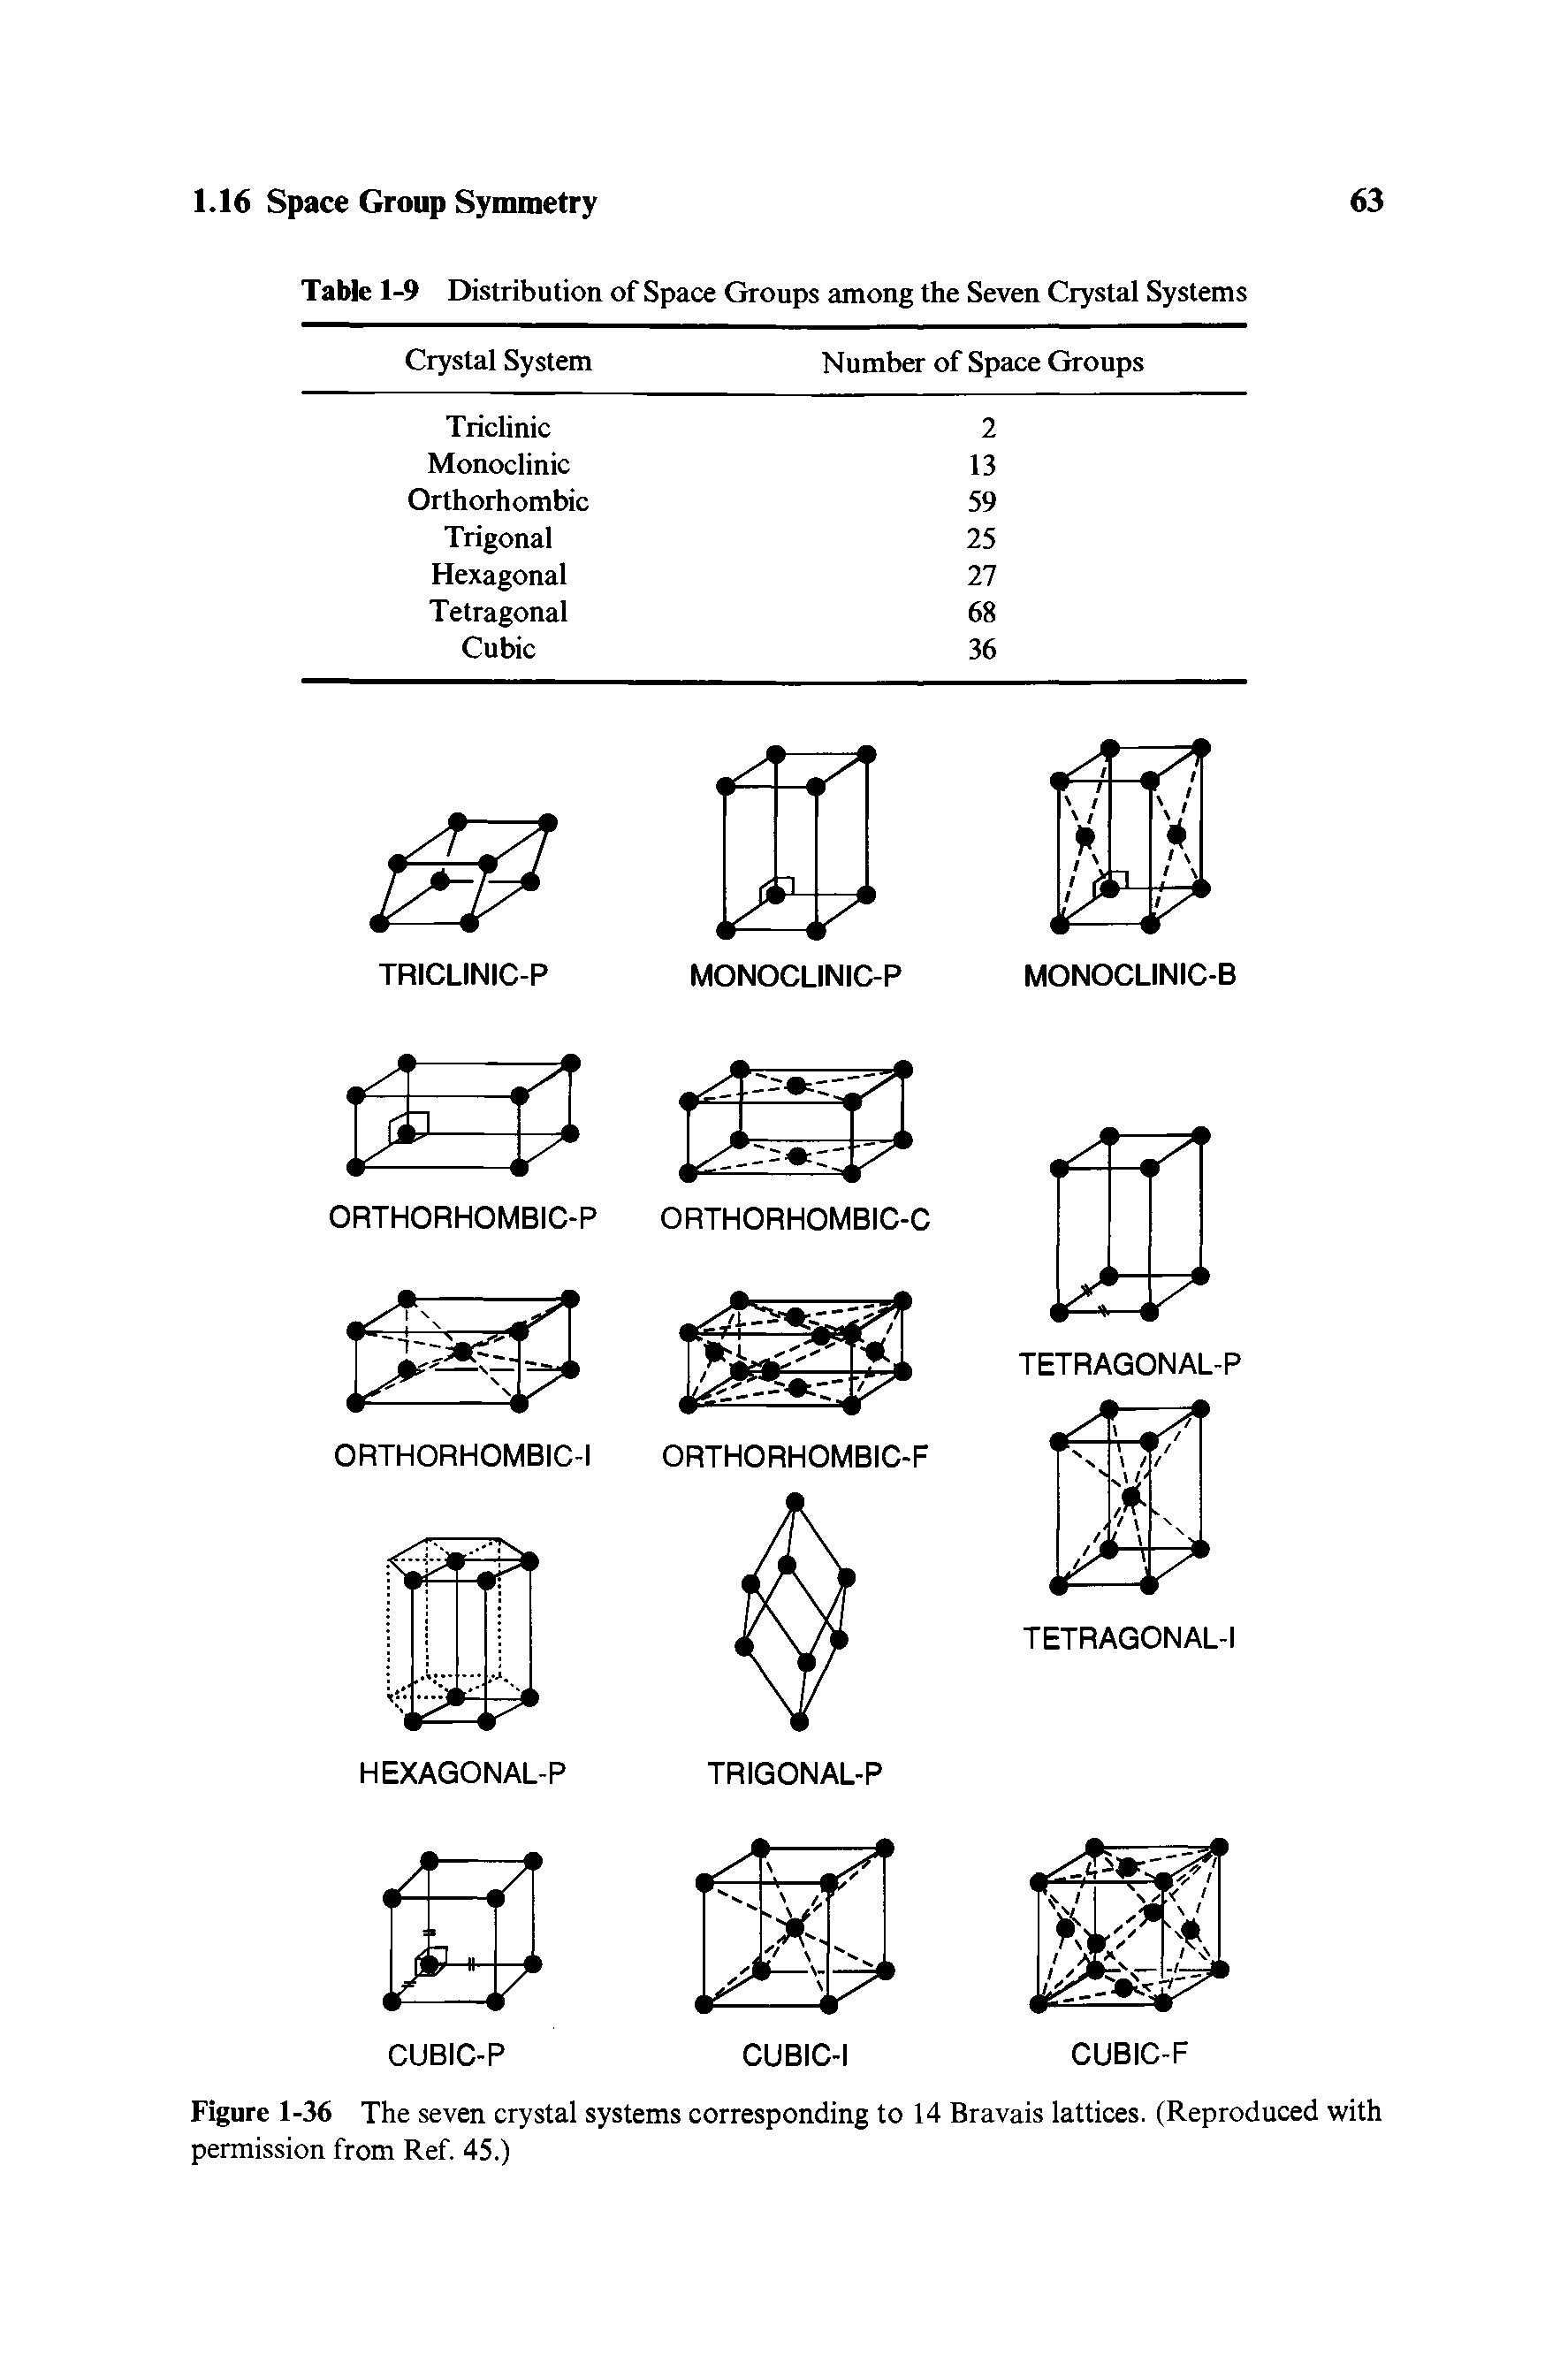 Figure 1-36 The seven crystal systems corresponding to 14 Bravais lattices. (Reproduced with permission from Ref. 45.)...